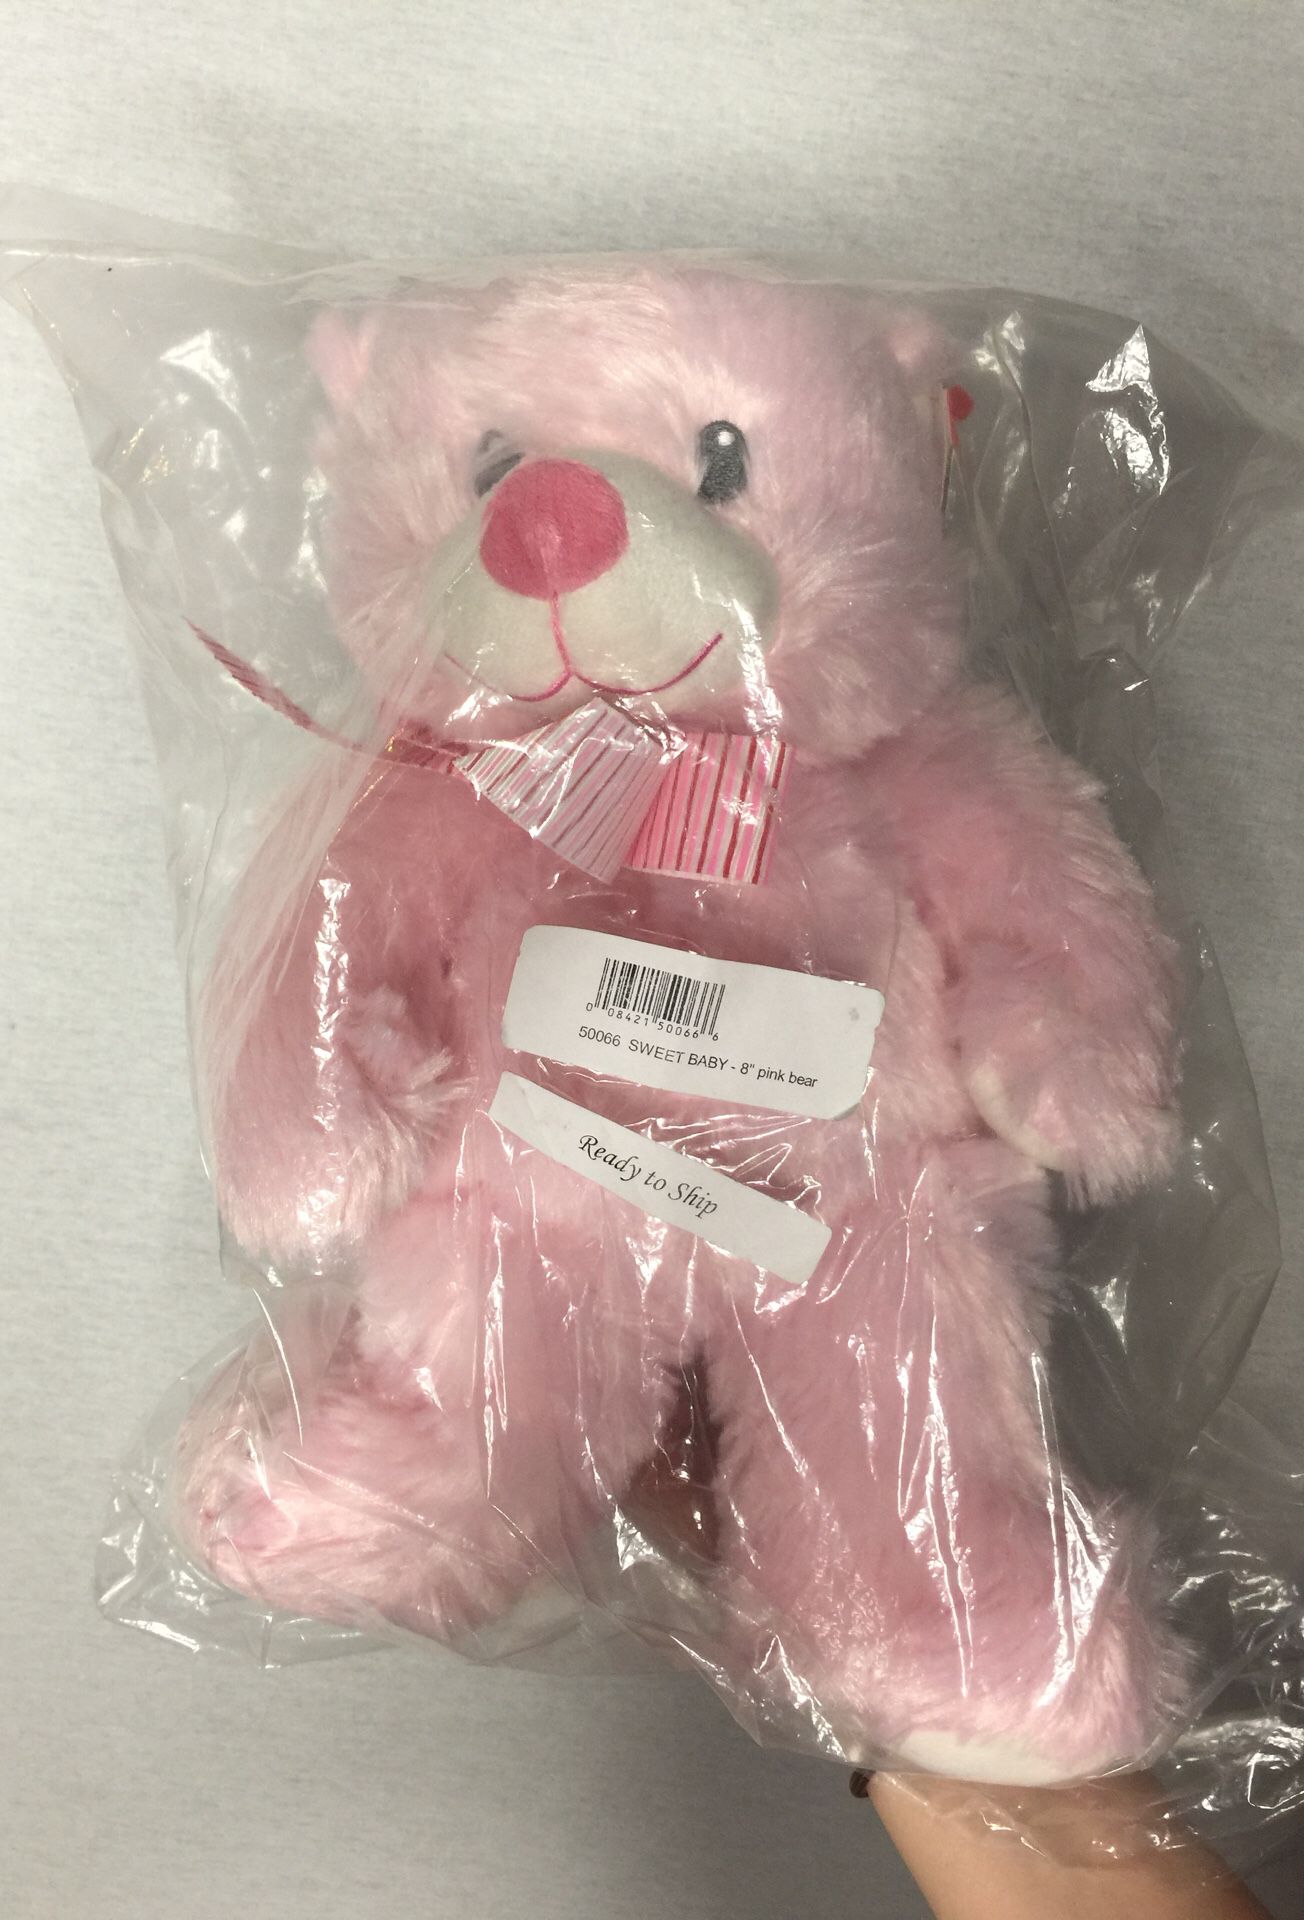 Brand New TY Pluffies My First Teddy Bear Sweet Baby Plush Stuffed Animal 8’’ pink